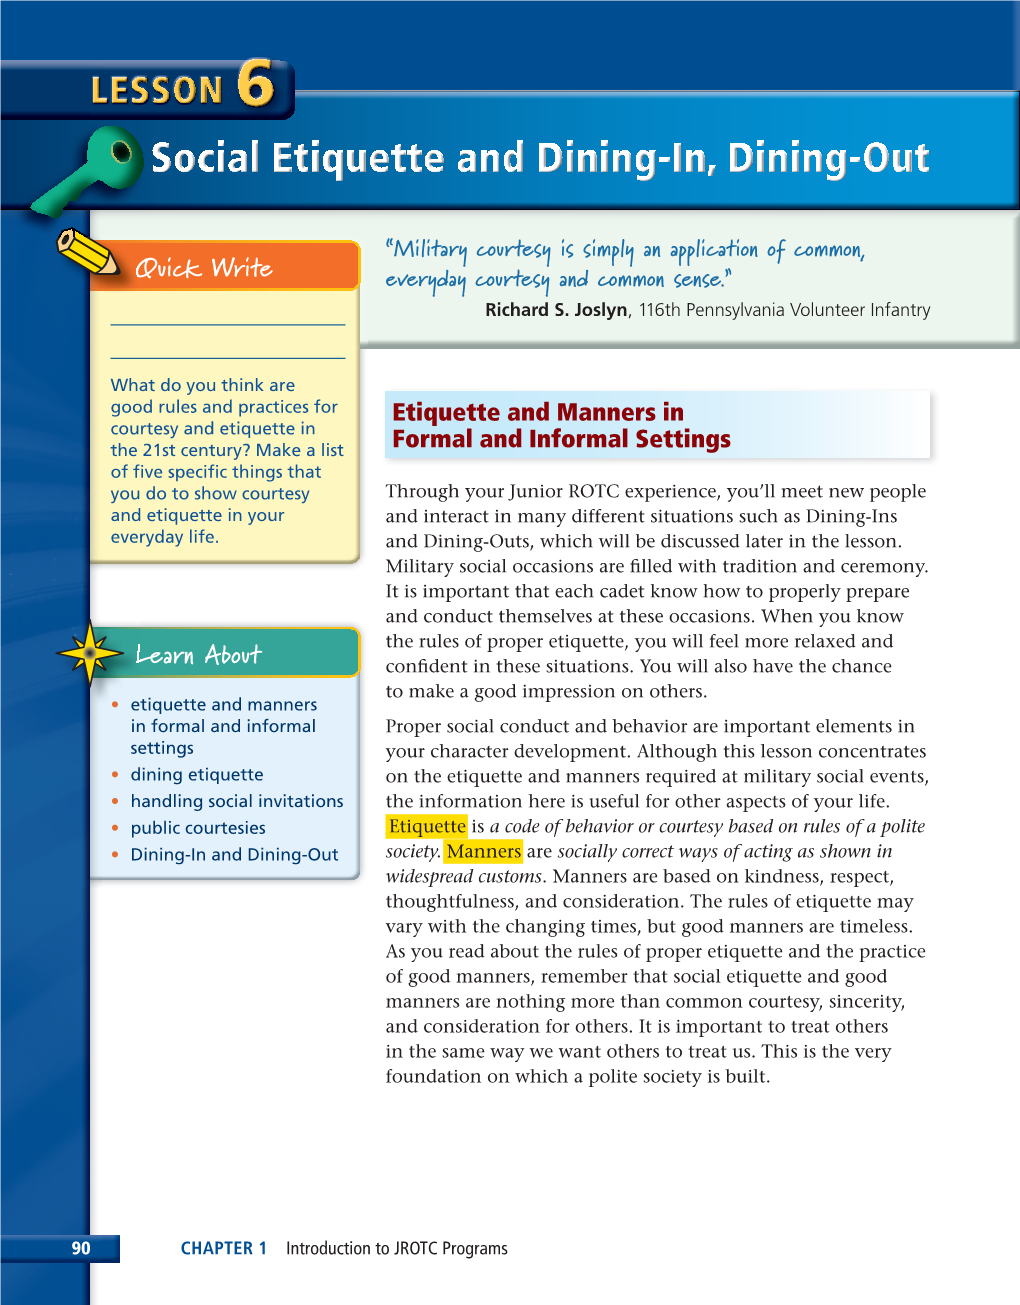 LESSON 6 Social Etiquette and Dining-In, Dining-Out